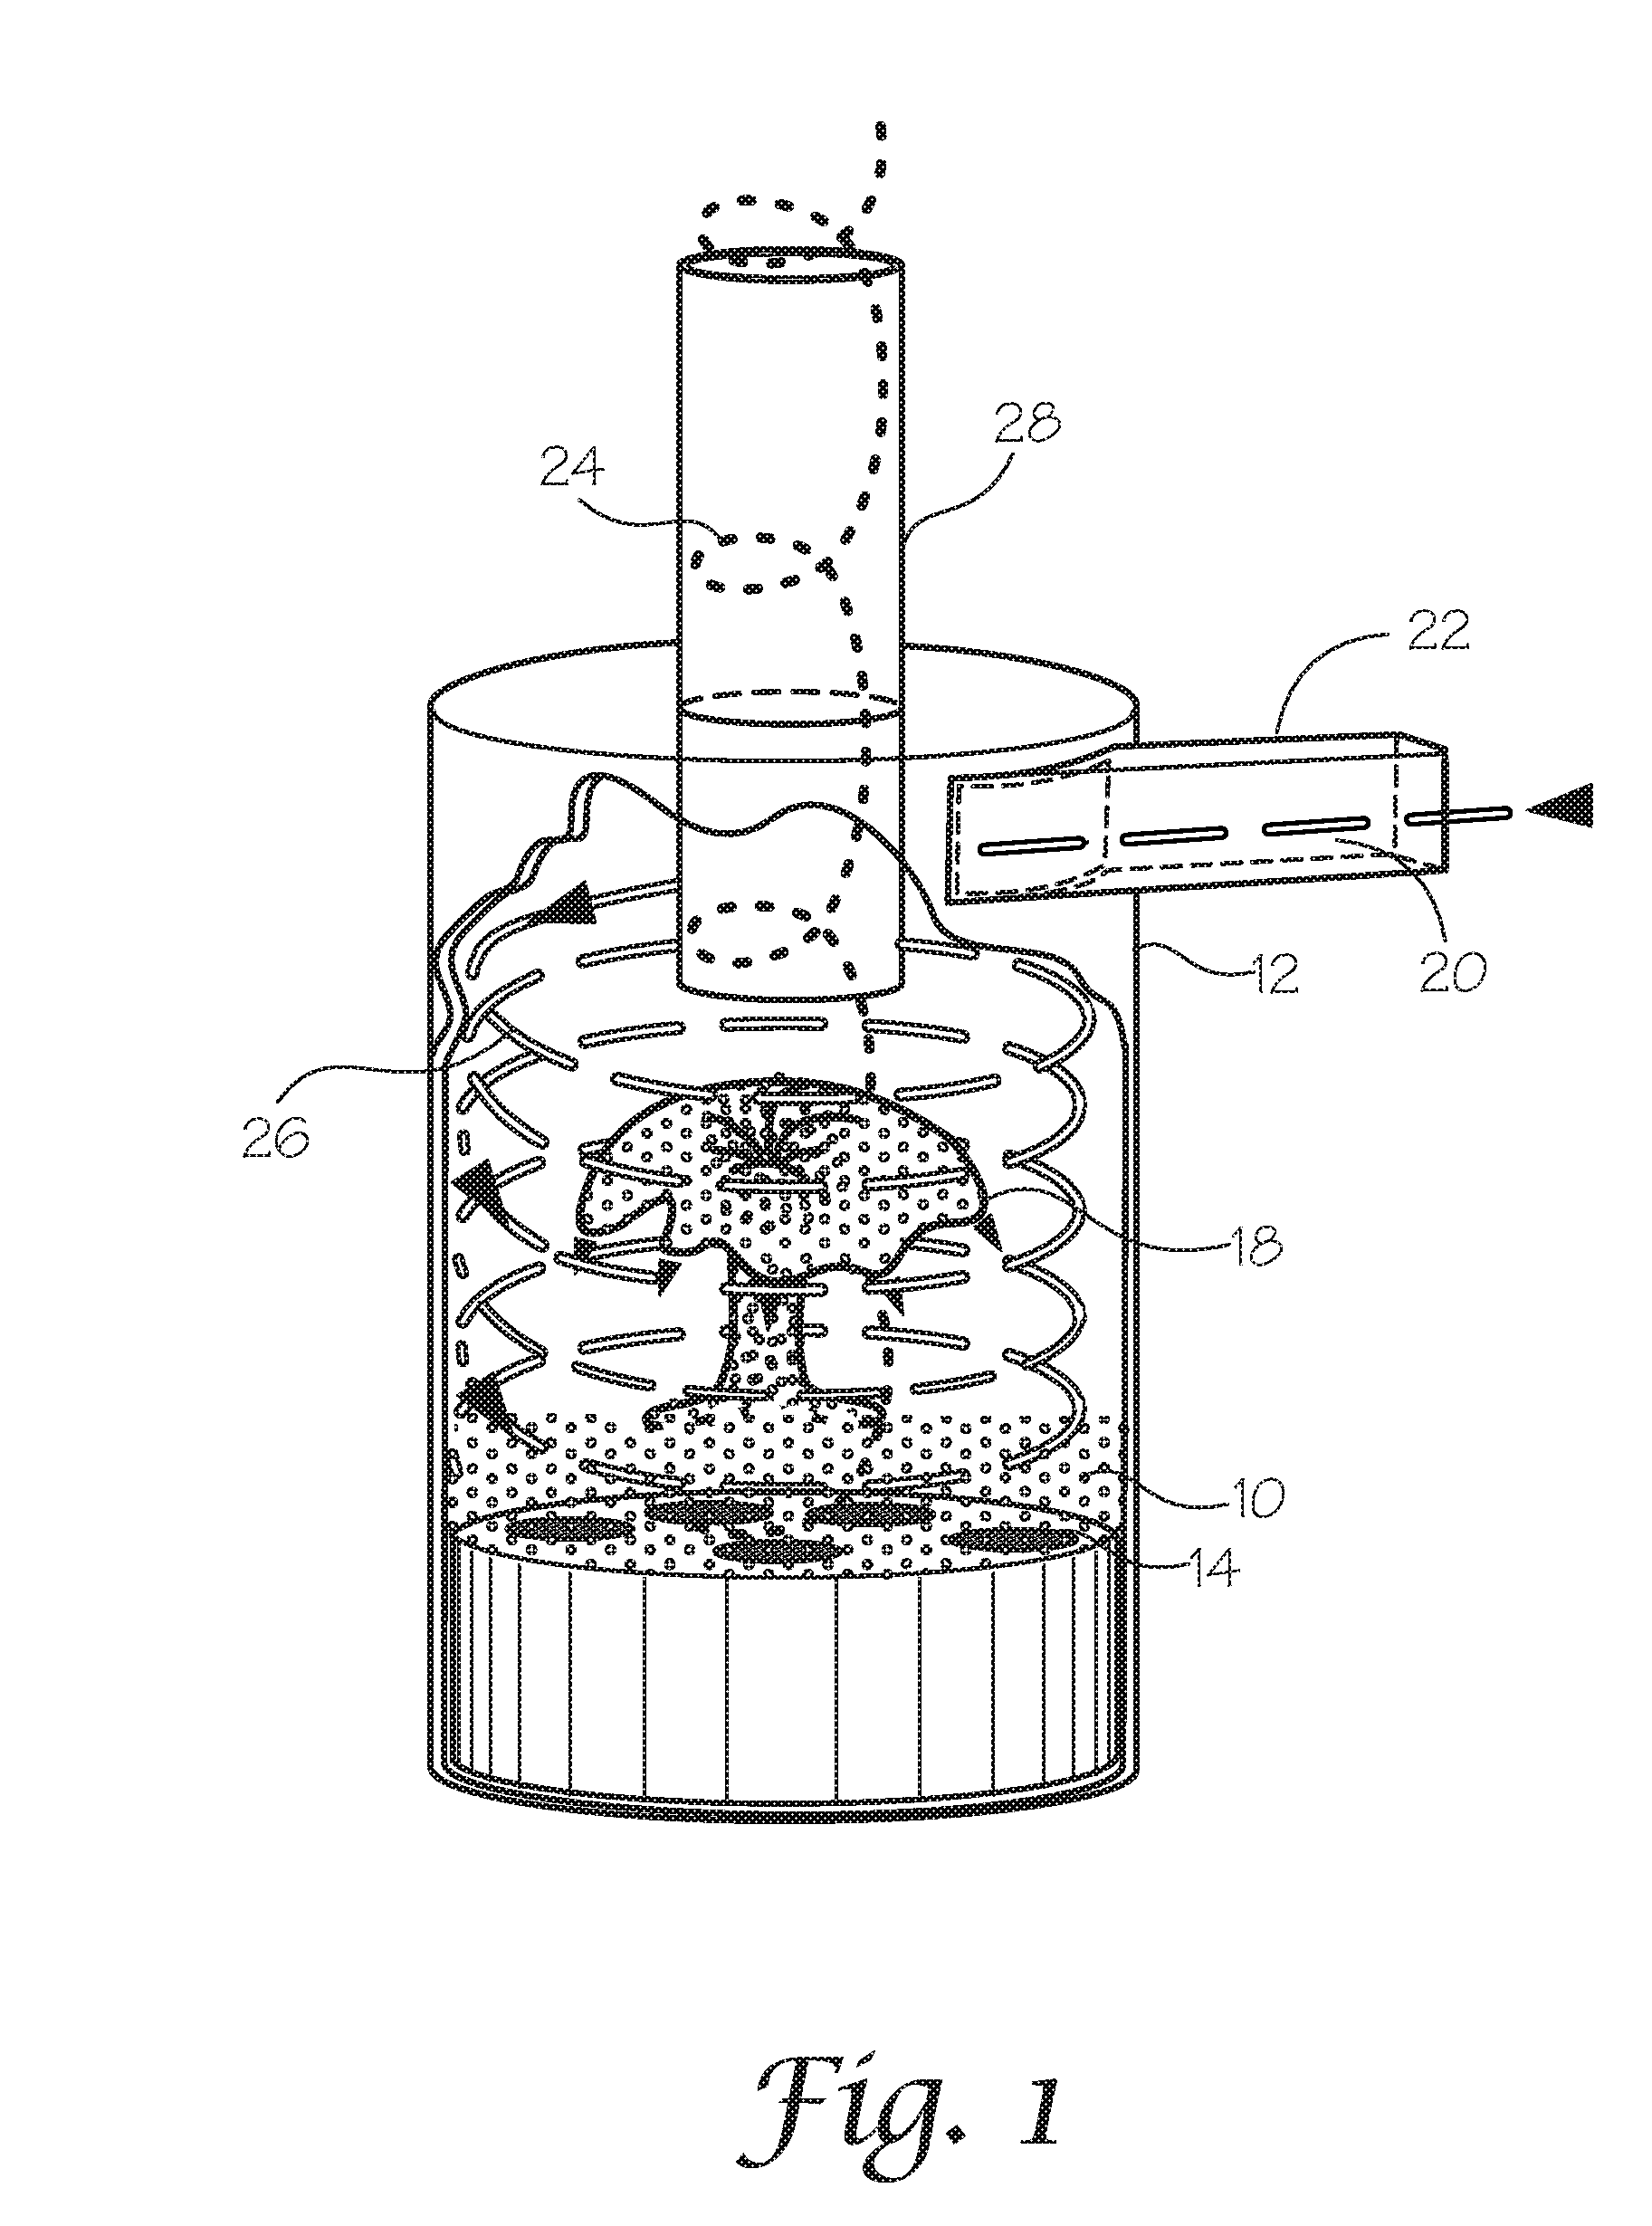 Method and device for separation of liquid mixtures without thermal distillation